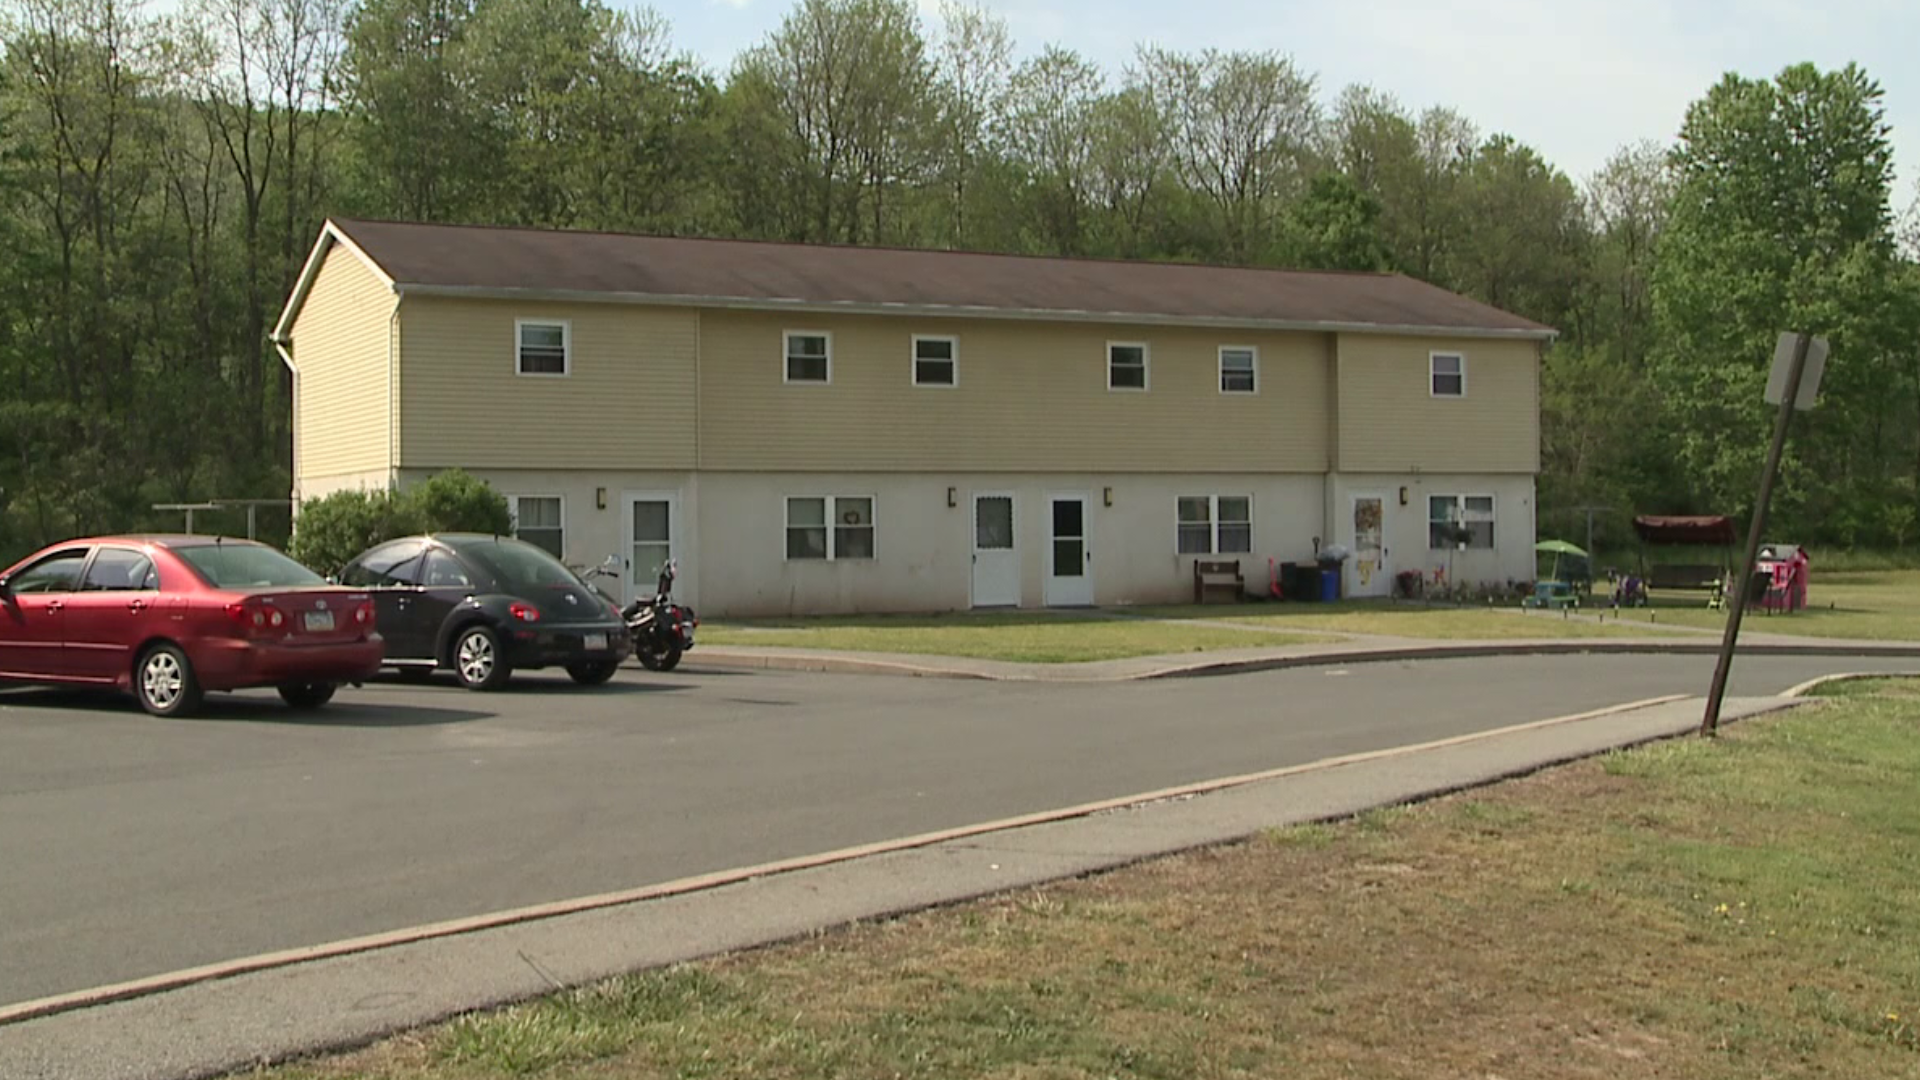 Police say they found stick explosives and materials to make explosives in a home in Jermyn.